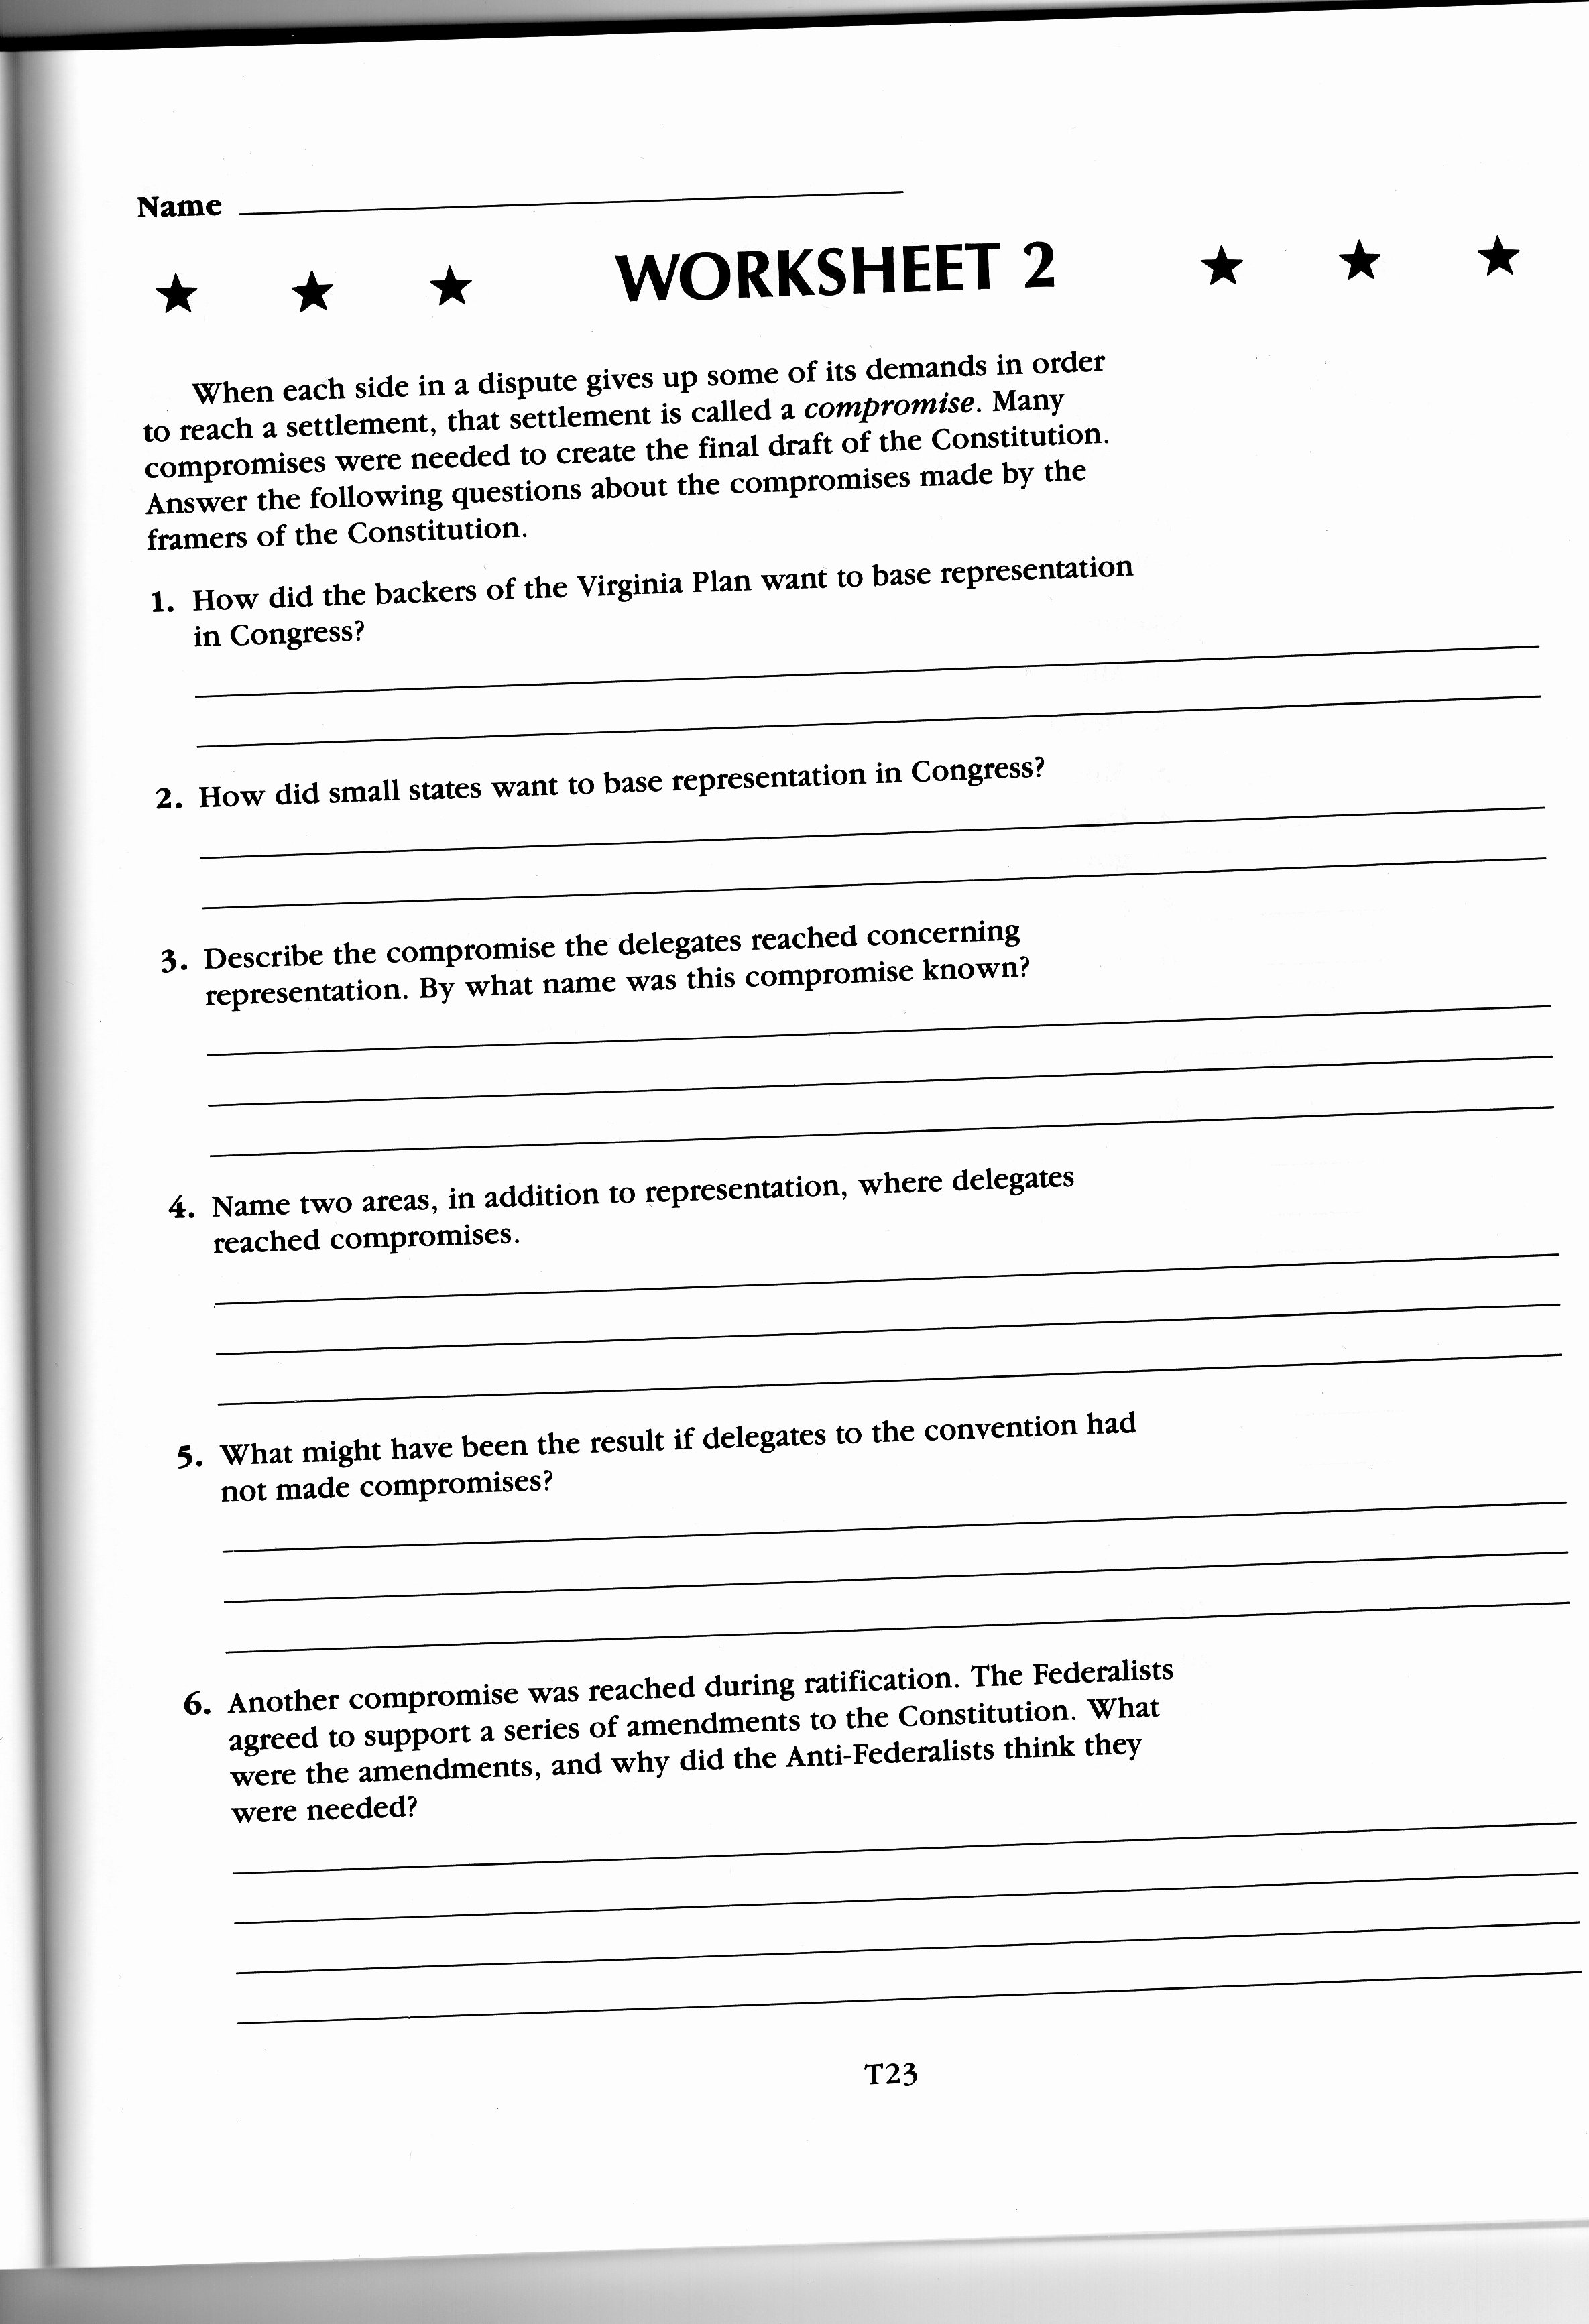 Ratifying The Constitution Worksheet Pertaining To Ratifying The Constitution Worksheet Answers